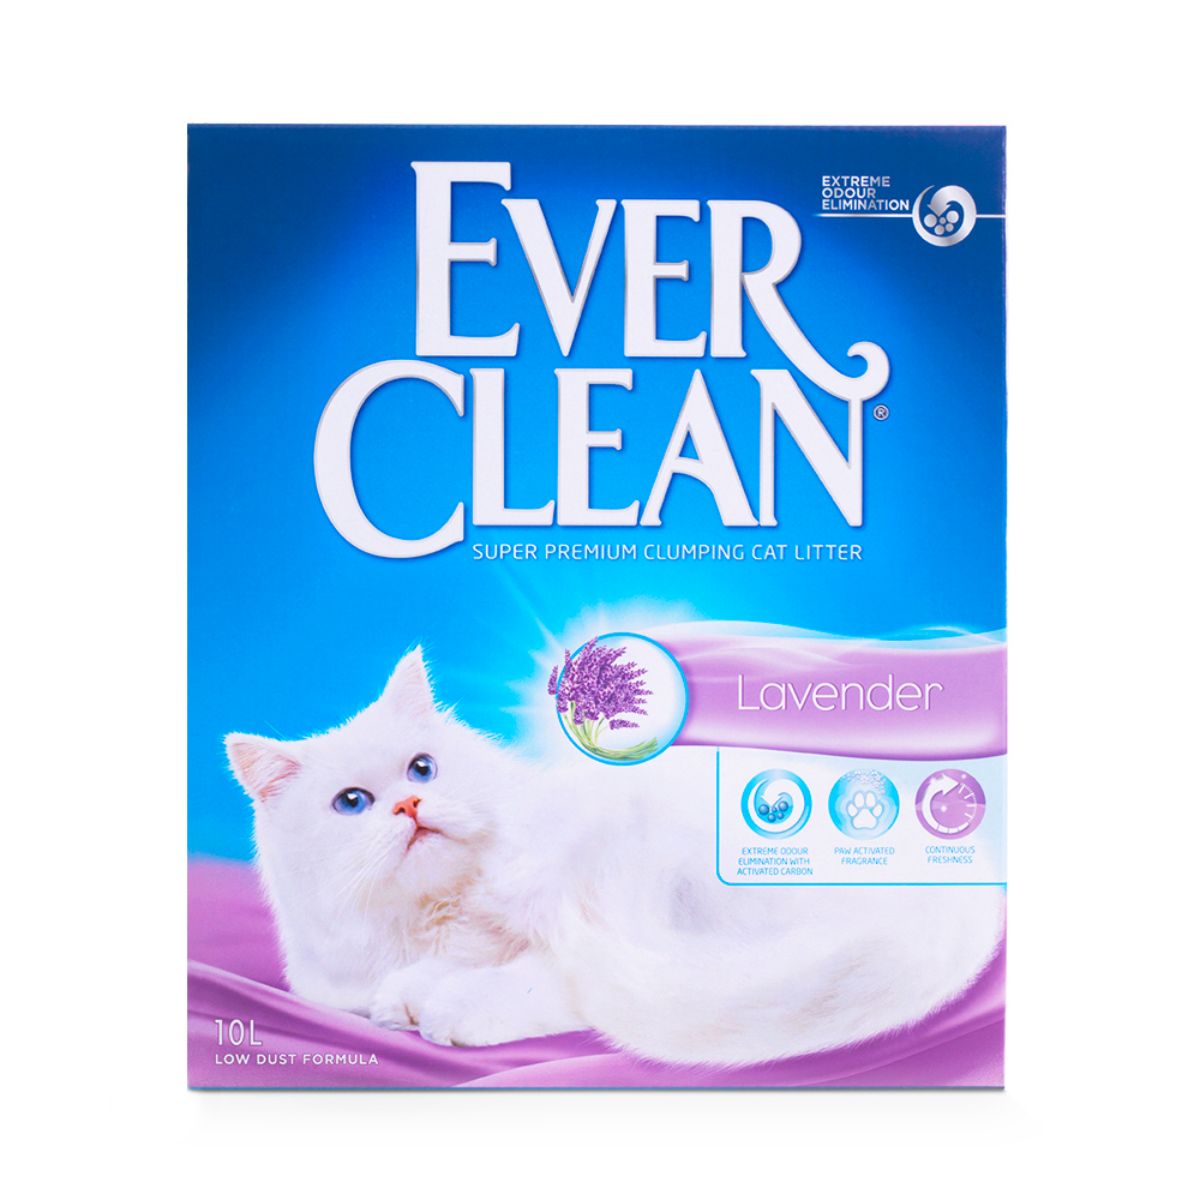 petstock-ever-clean-lavender-scented-clumping-cat-litter-10l-petstock